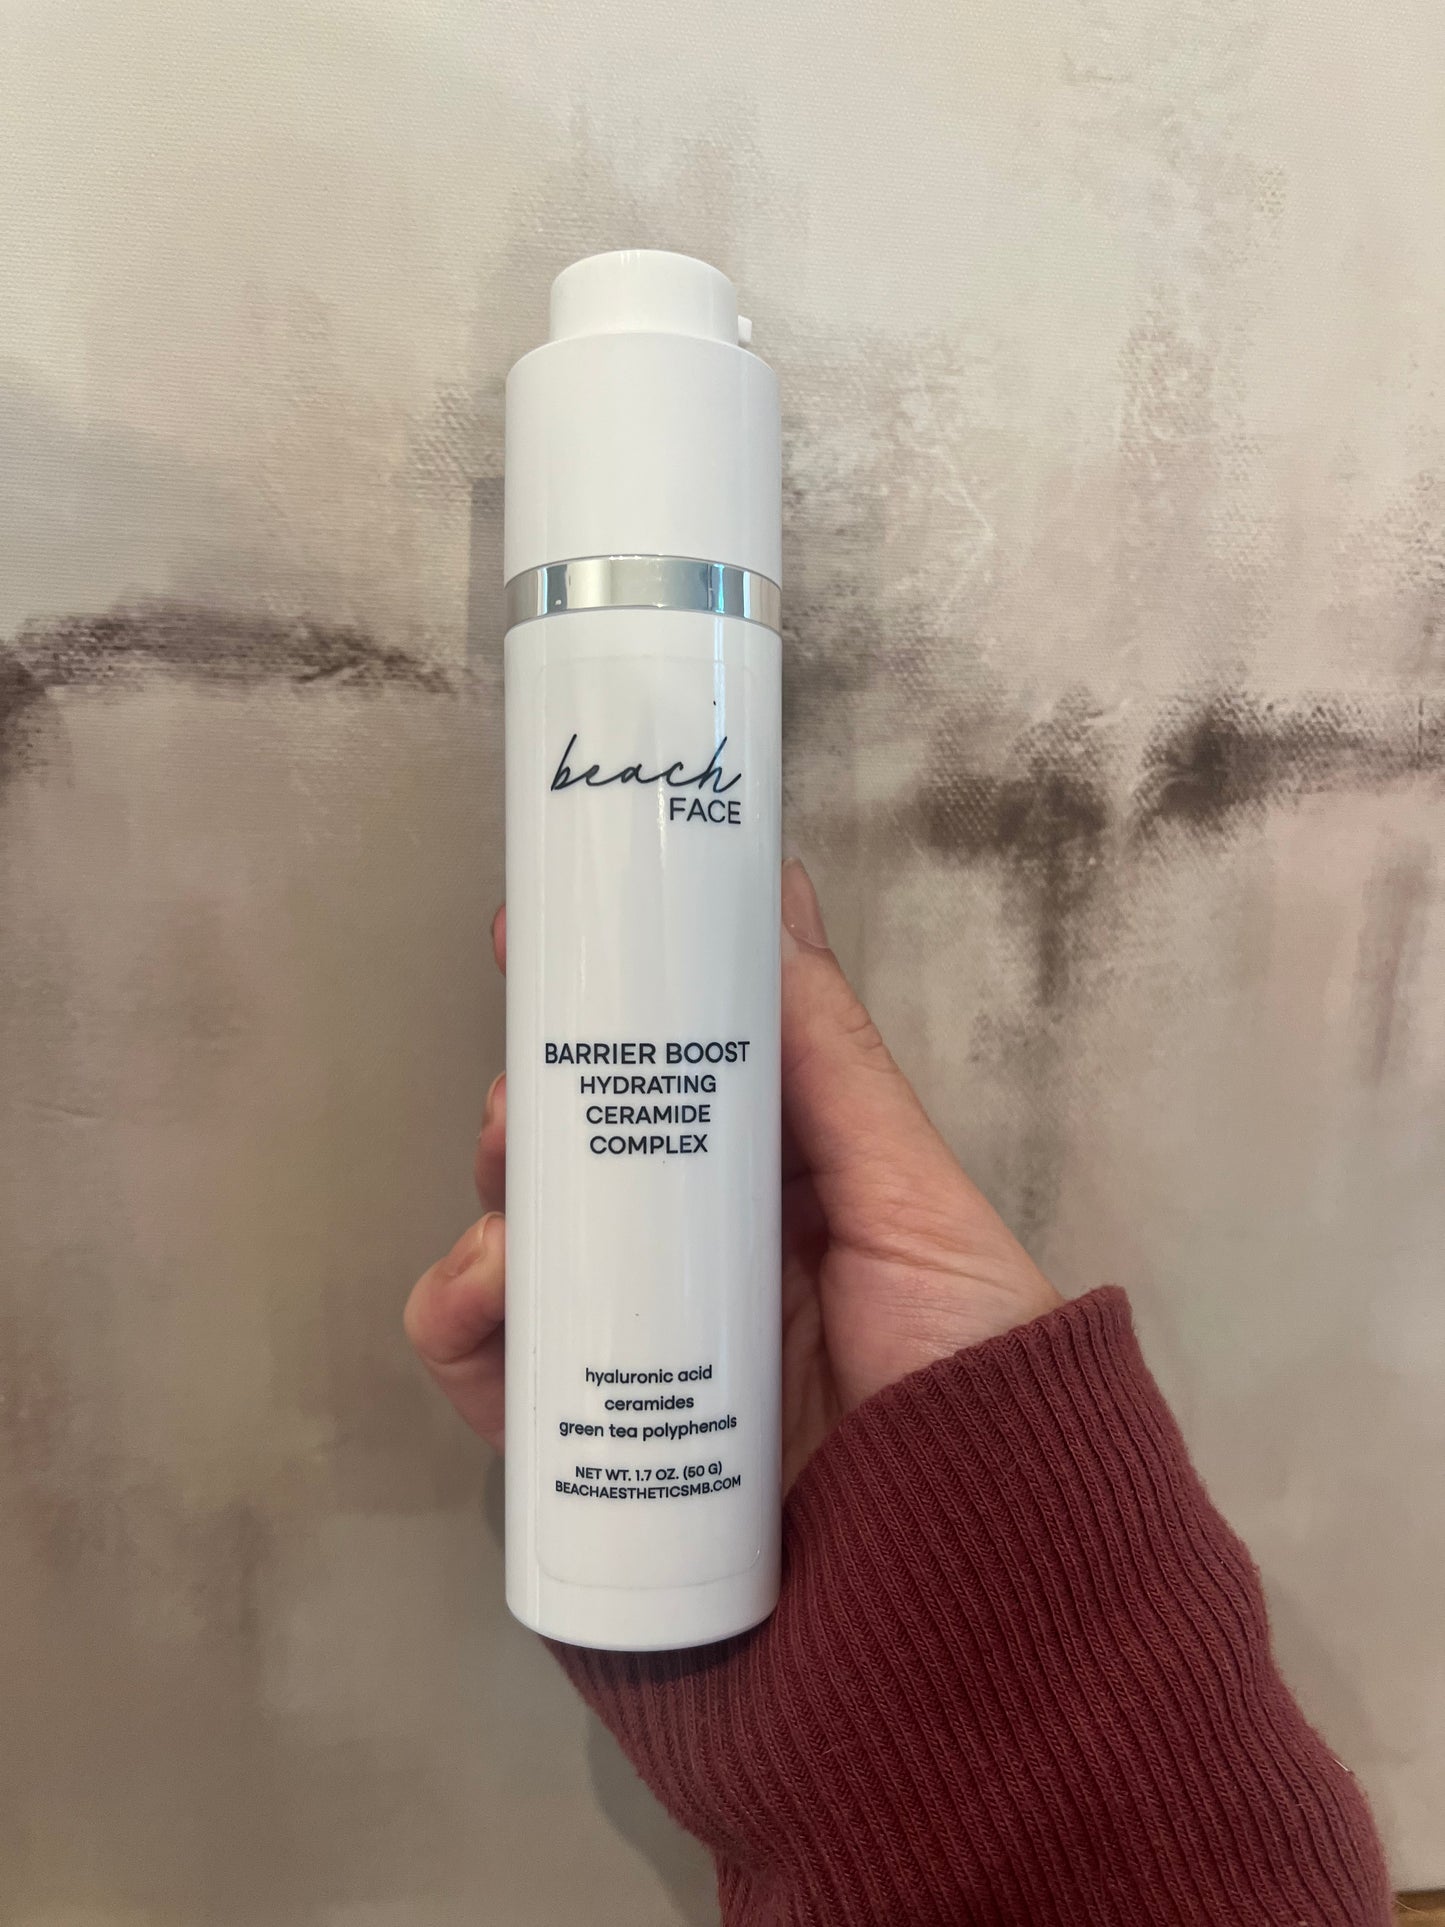 Barrier Boost Hydrating Ceramide Complex